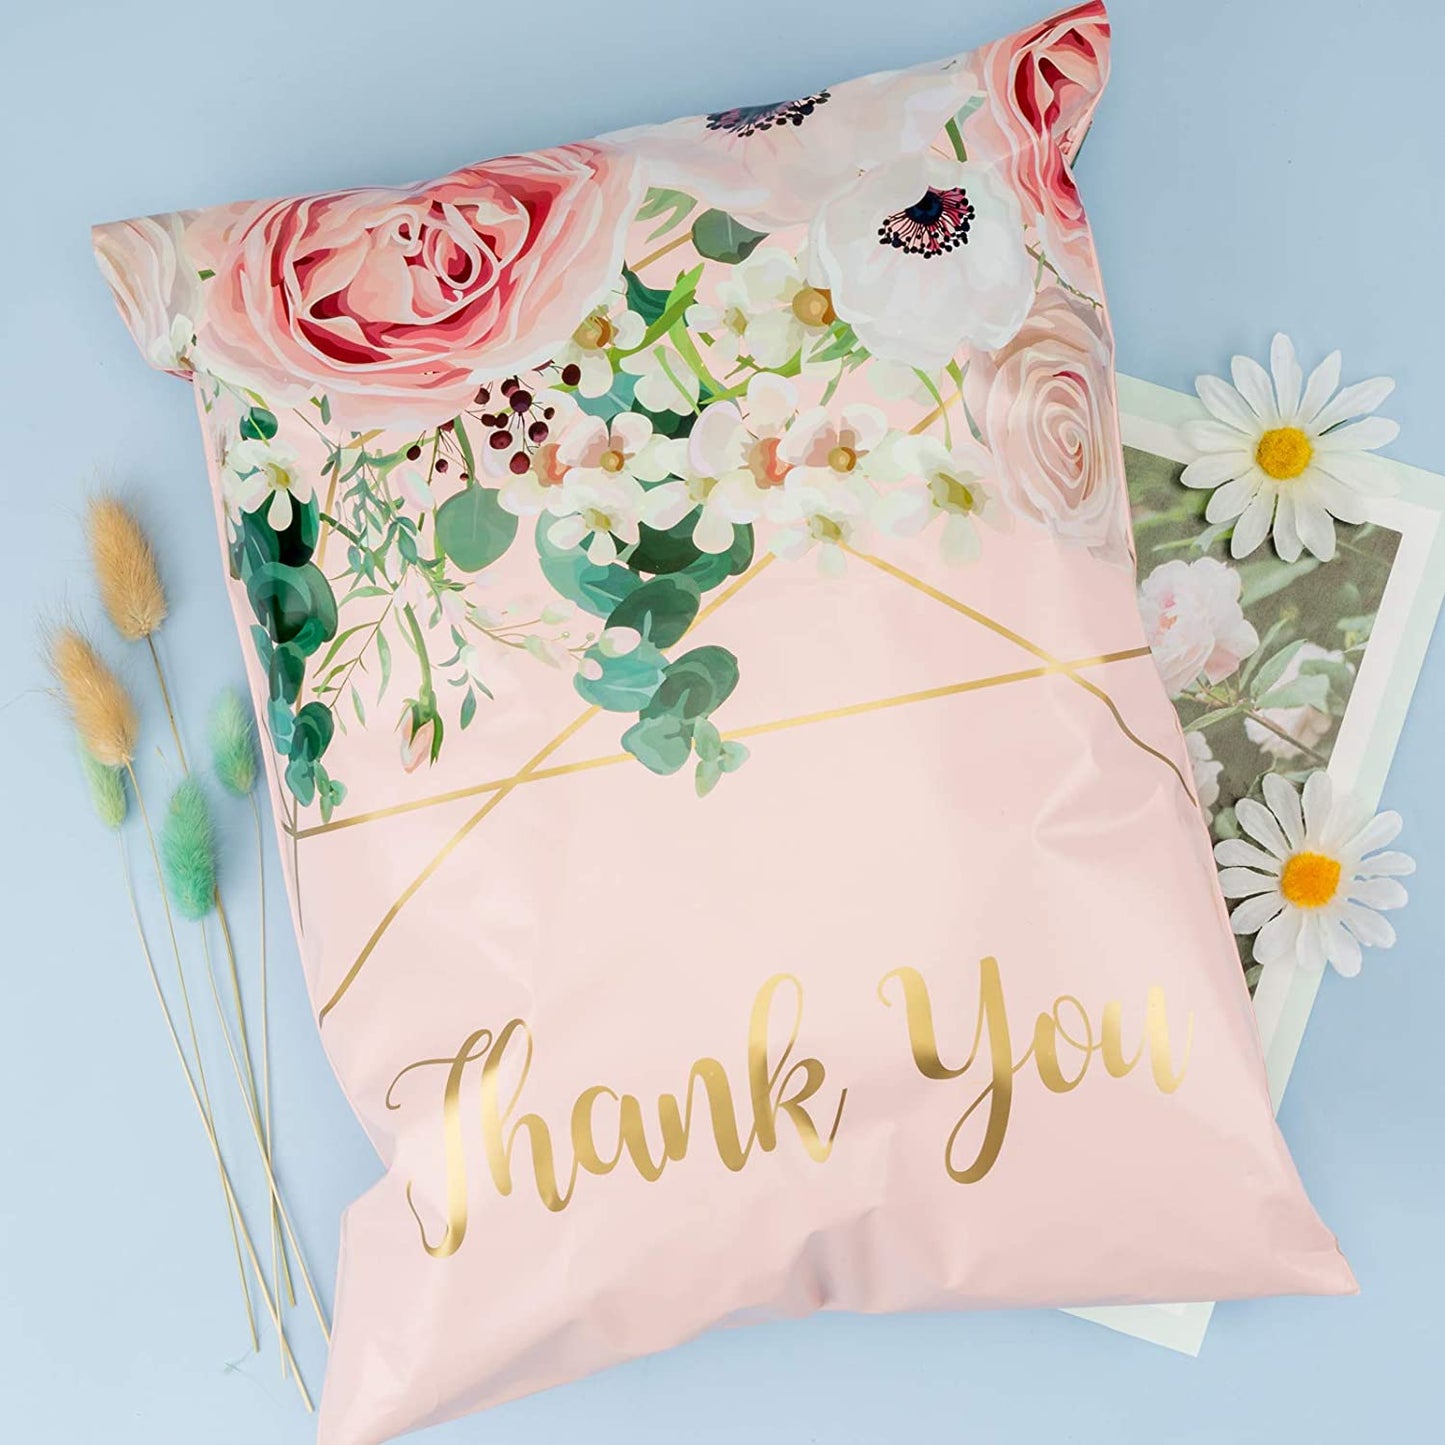 WRAPLA 30 x 40cm (12 x 15.5 inches) Poly Mailers Shipping Bags Thank You Notes Flowers Surrounded Pink Poly Mailers 3 Mil Heavy Duty Self Seal Mailing Envelopes - 50 Pack